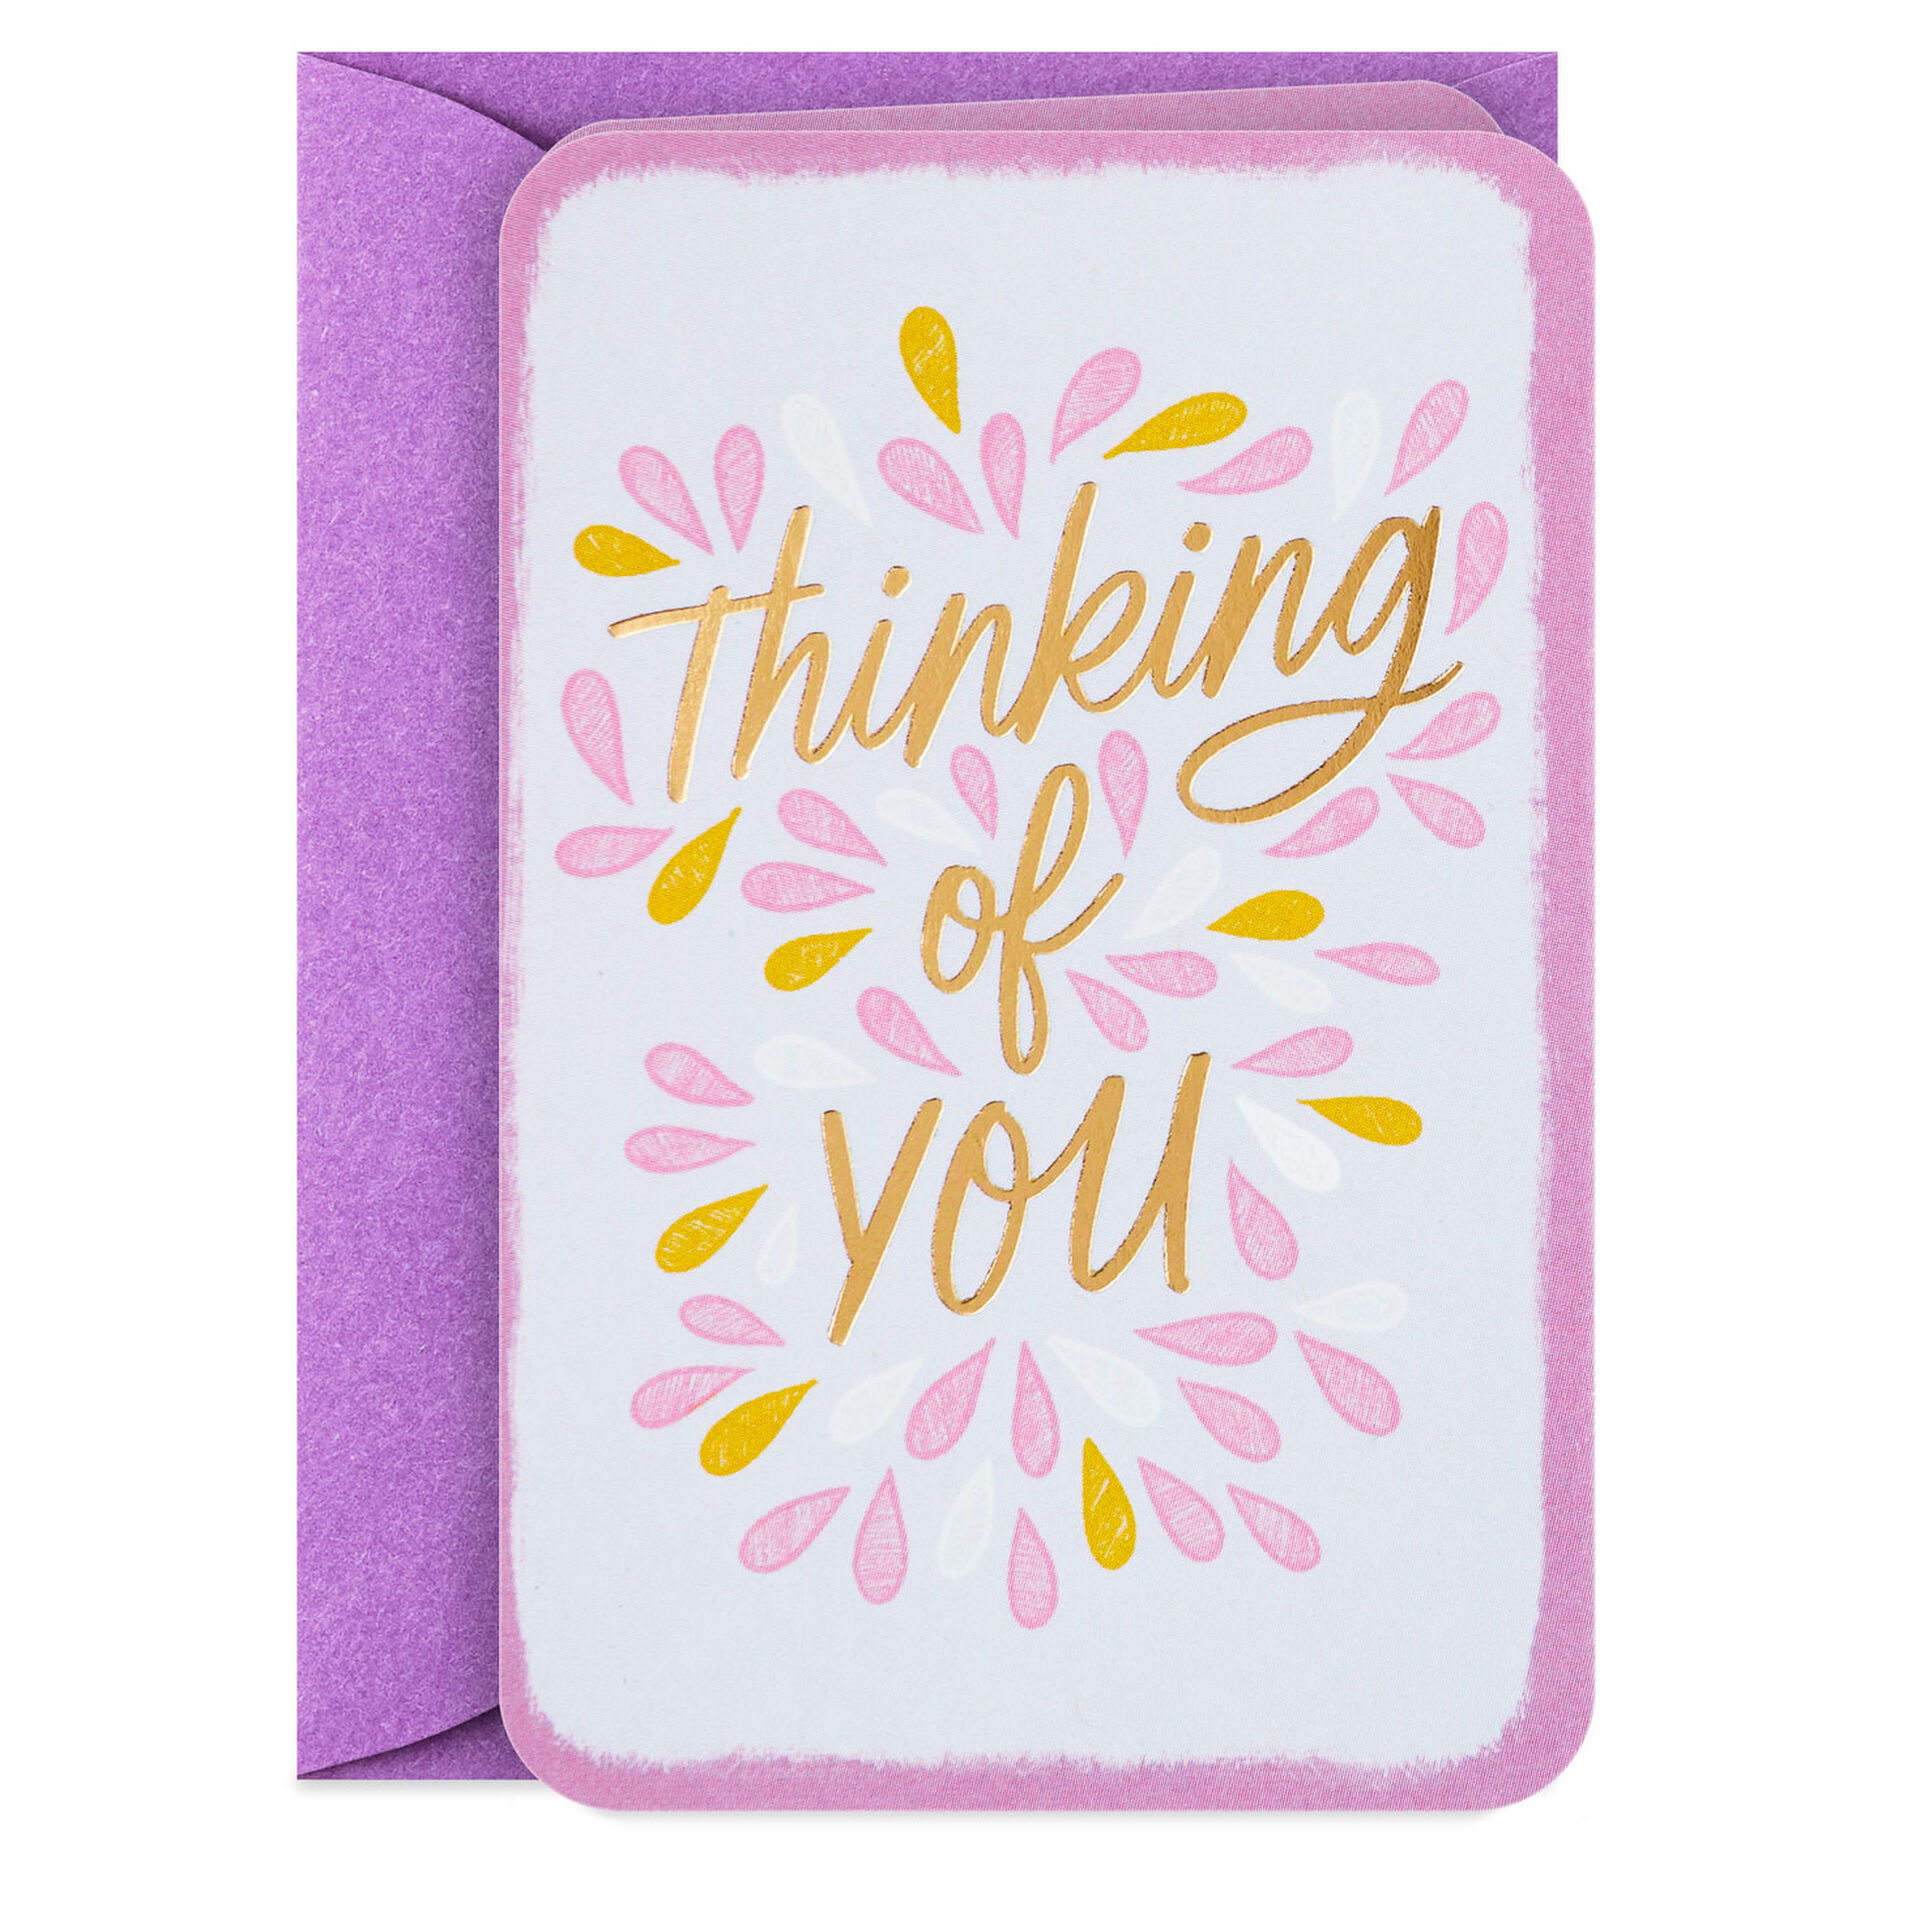 Purple-and-Gold-Leaves-Mini-Blank-Thinking-of-You-Card_199LJB1813_02